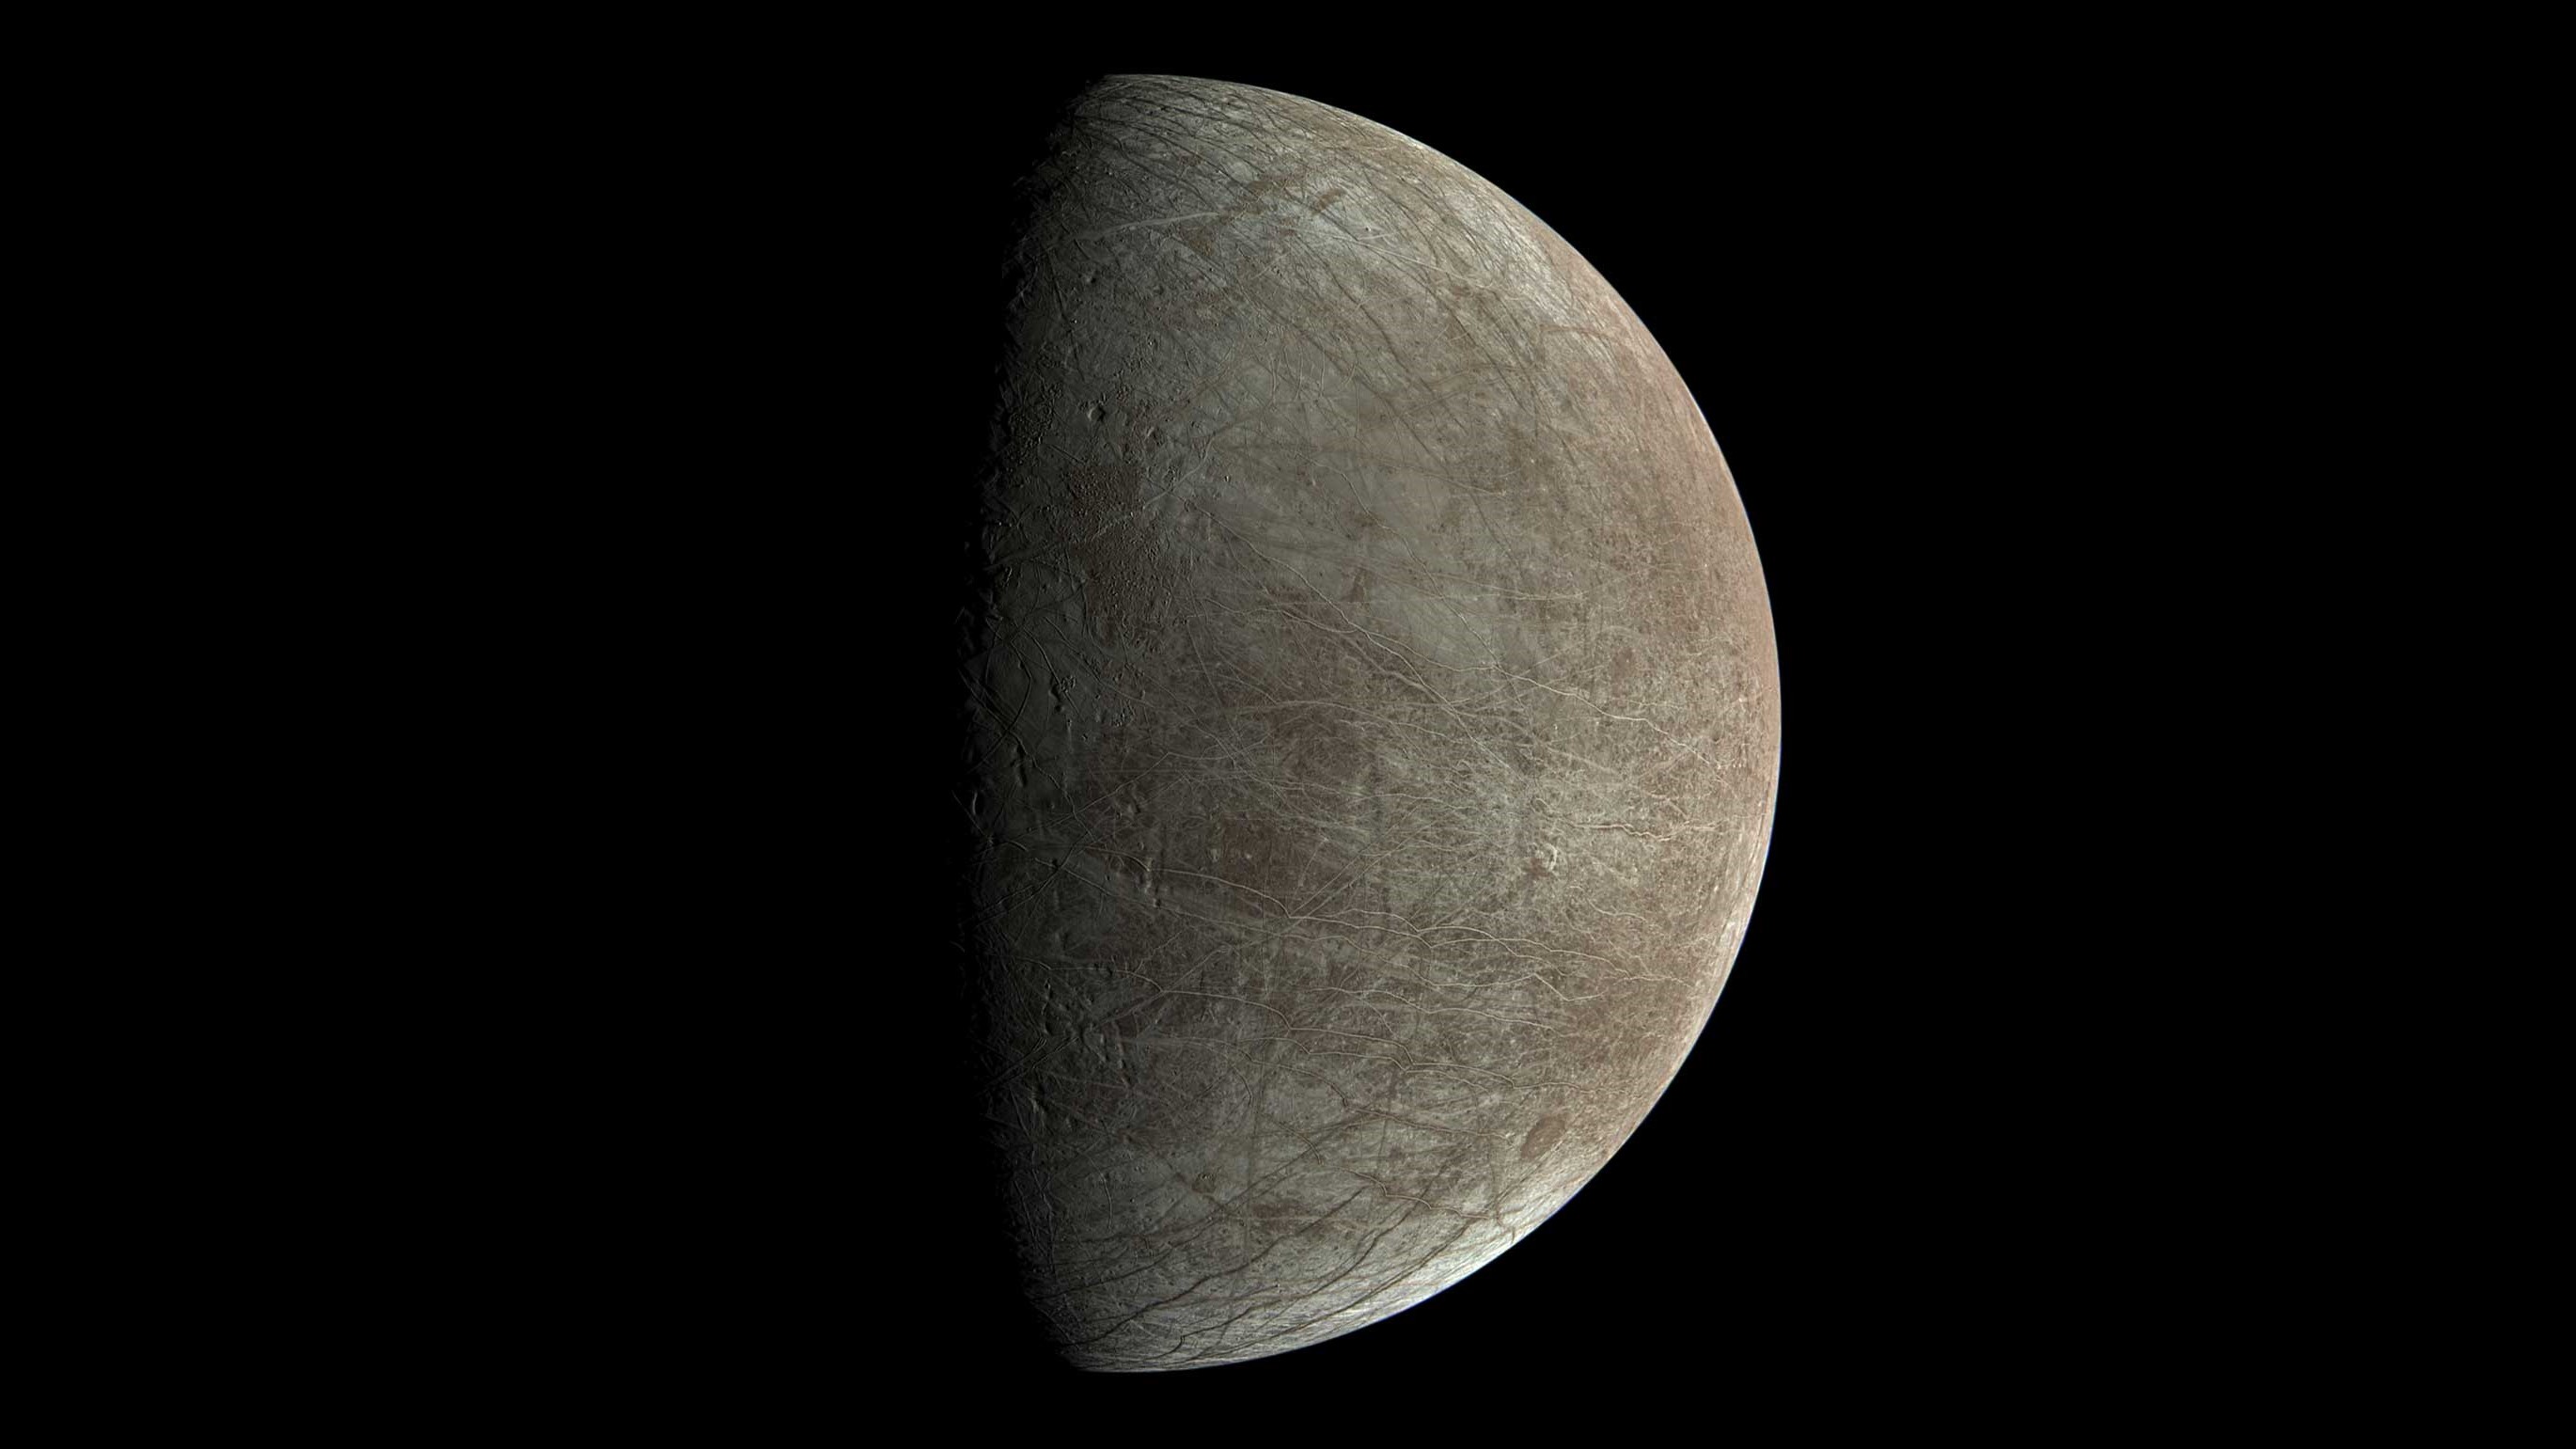 Jupiter moon Europa's buried ocean may alter rotation of its icy shell